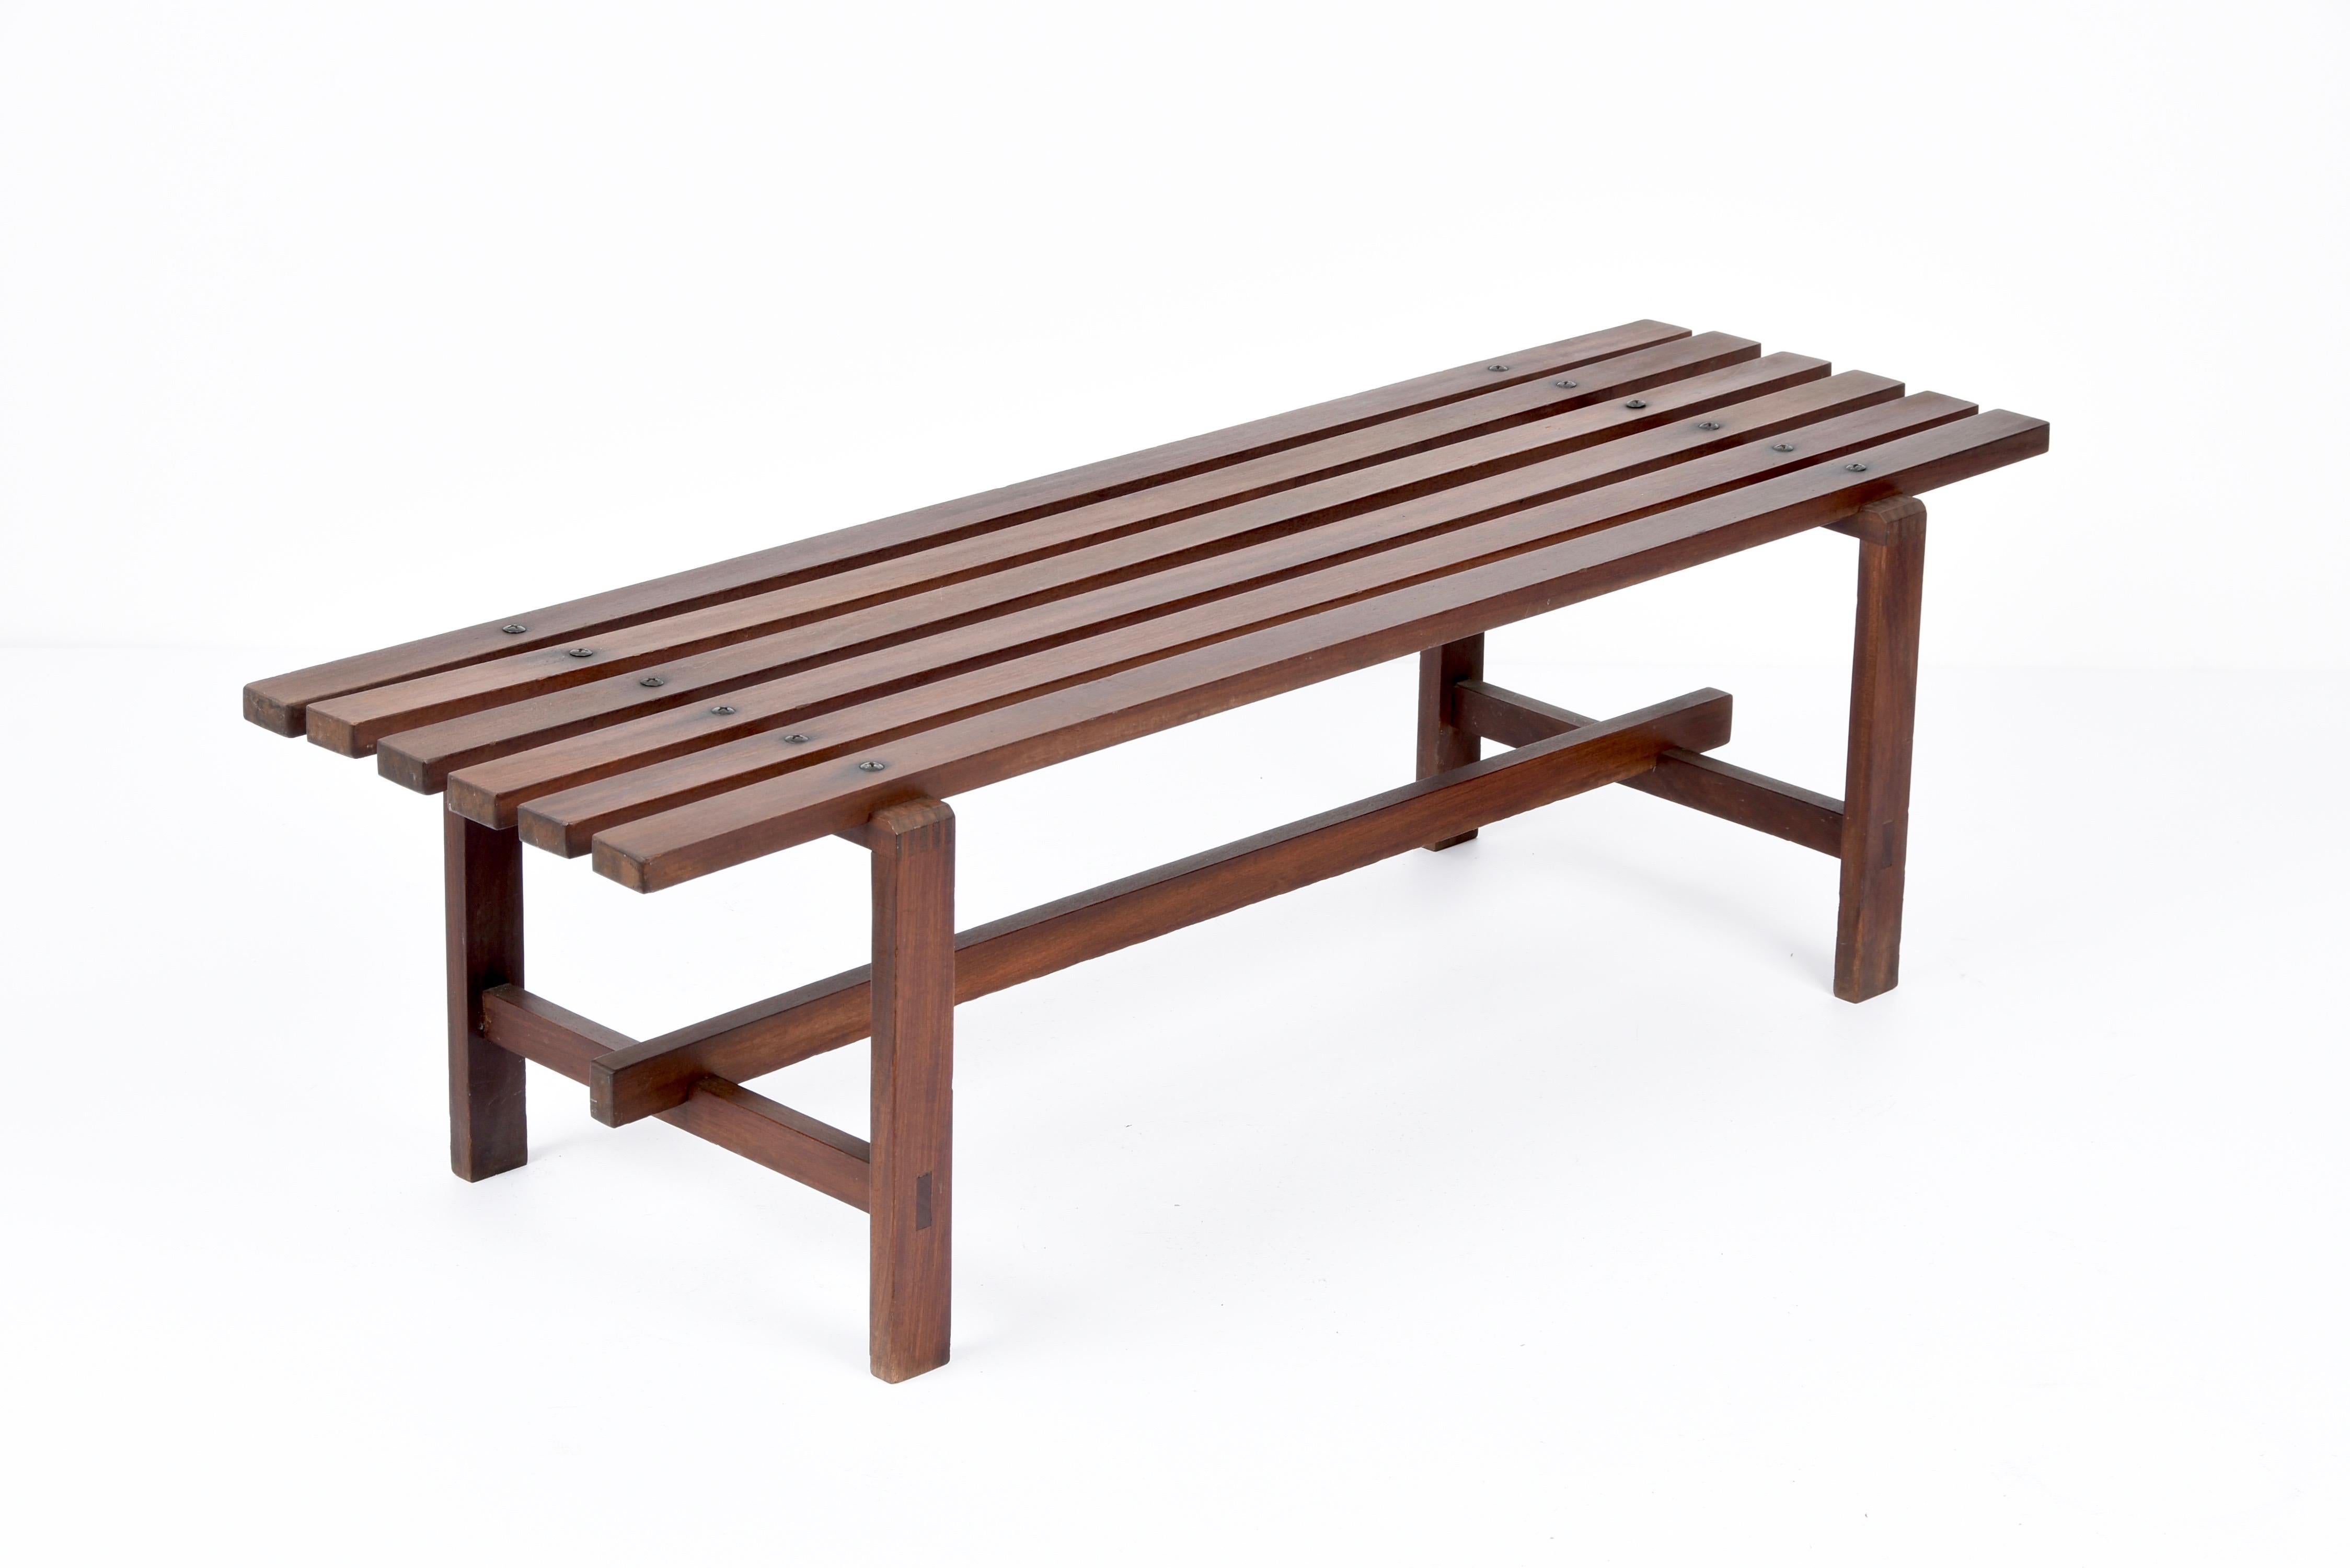 Marvellous midcentury bench made of dark brown teak wood. This item is a Scandinavian production of the 1960s. 

The piece is made of six horizontal wooden pieces for the seat and of a structure made of similar smaller elements.

An excellently